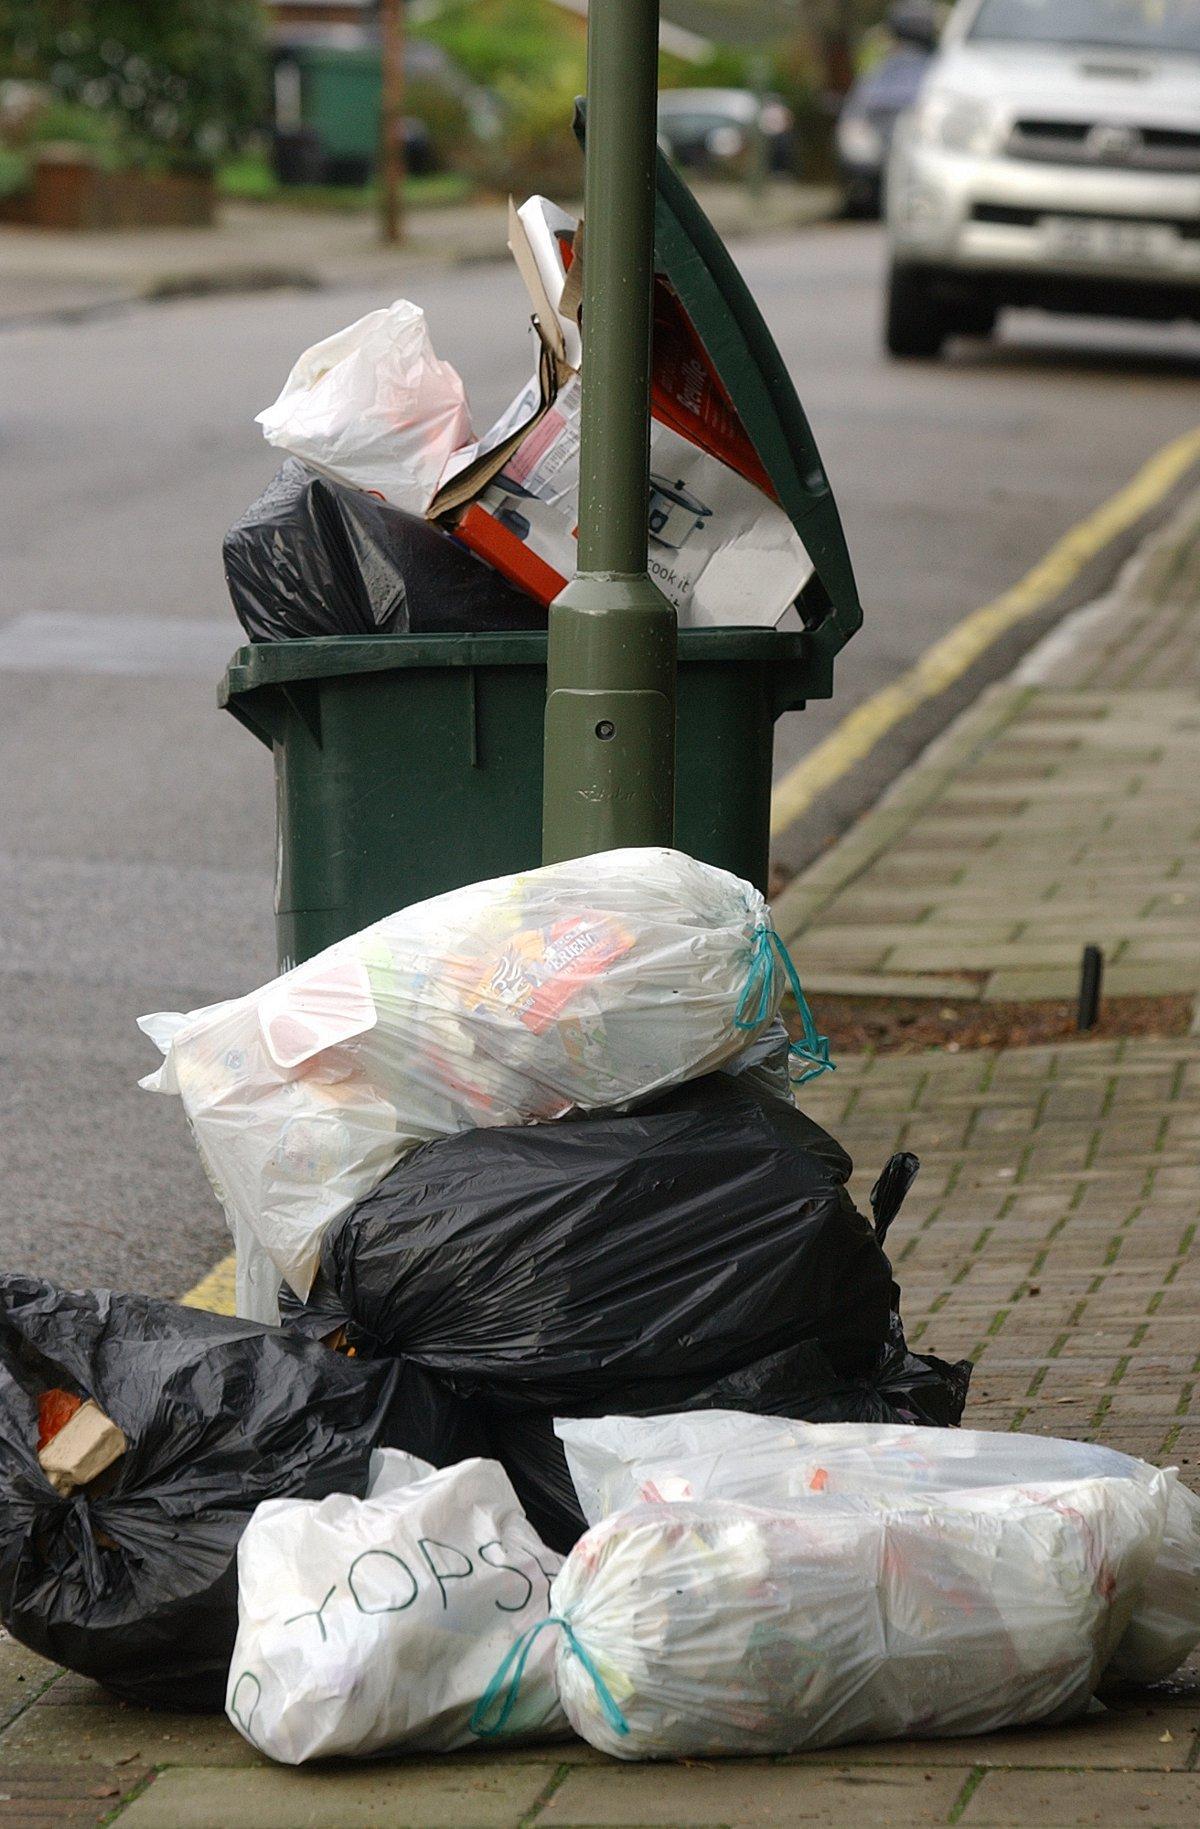 Unite warns of rubbish piling high over the summer if strikes go ahead